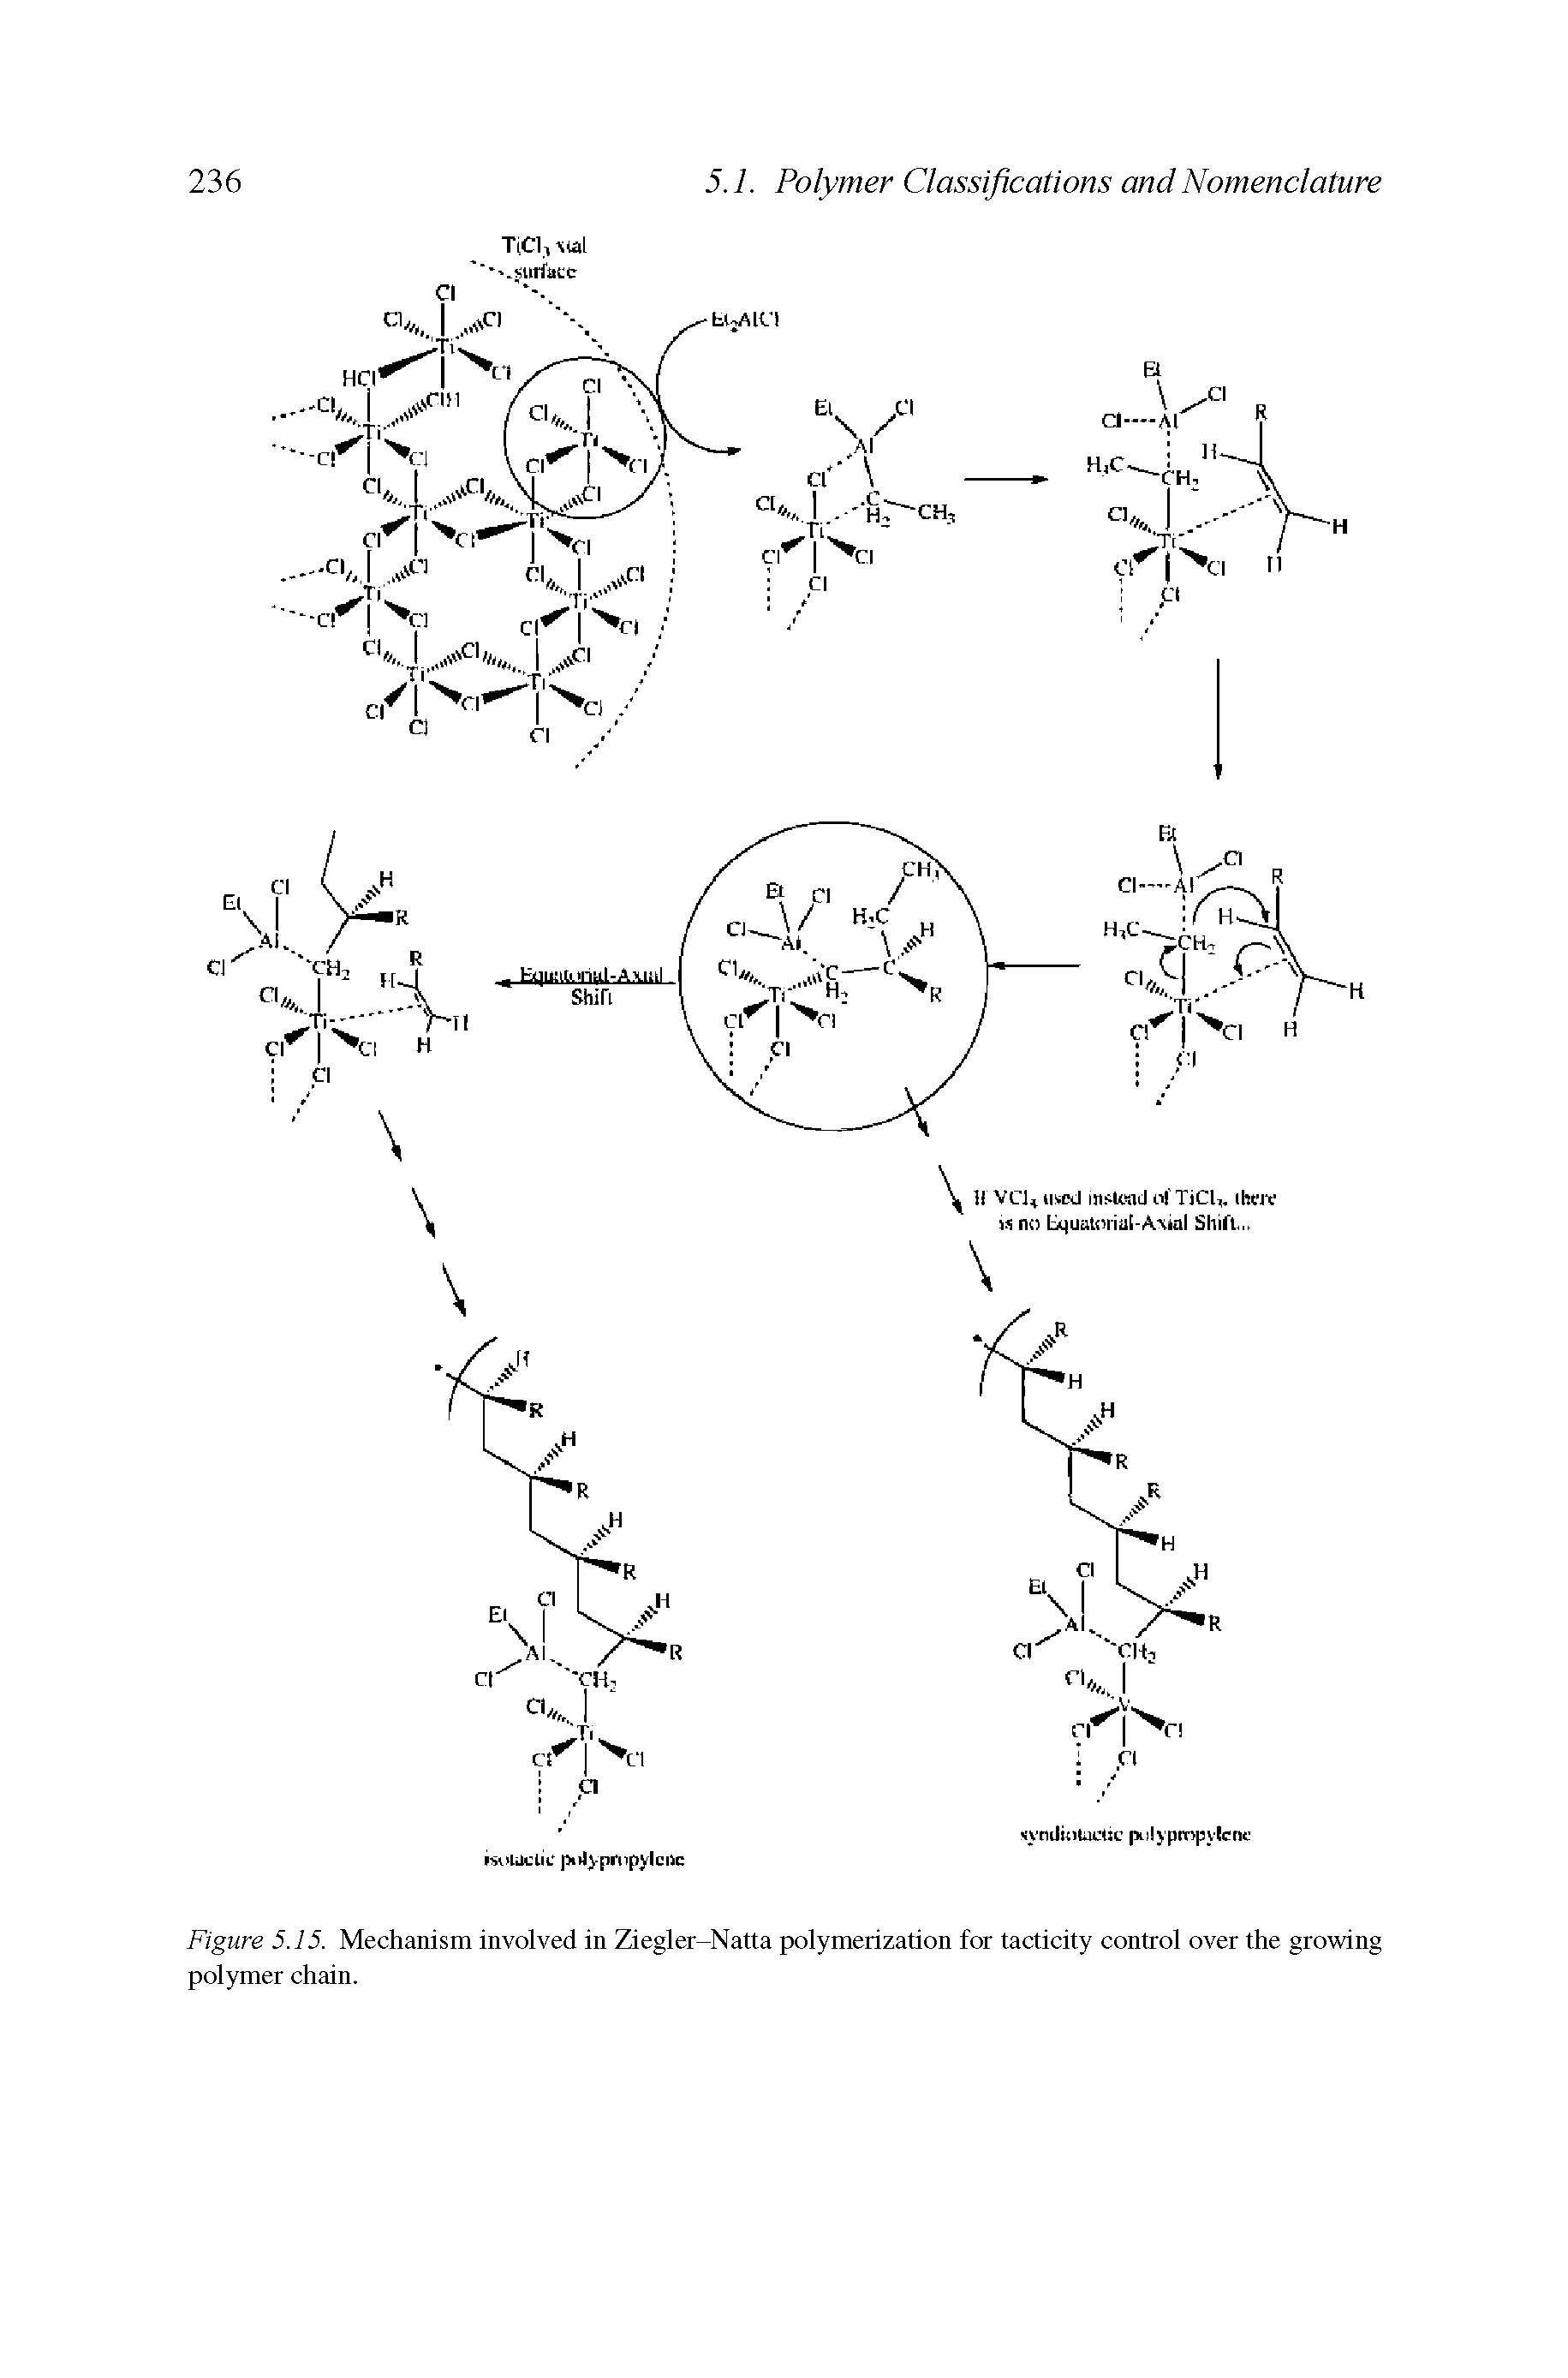 Figure 5.15. Mechanism involved in Ziegler-Natta polymerization for tacticity control over the growing polymer chain.